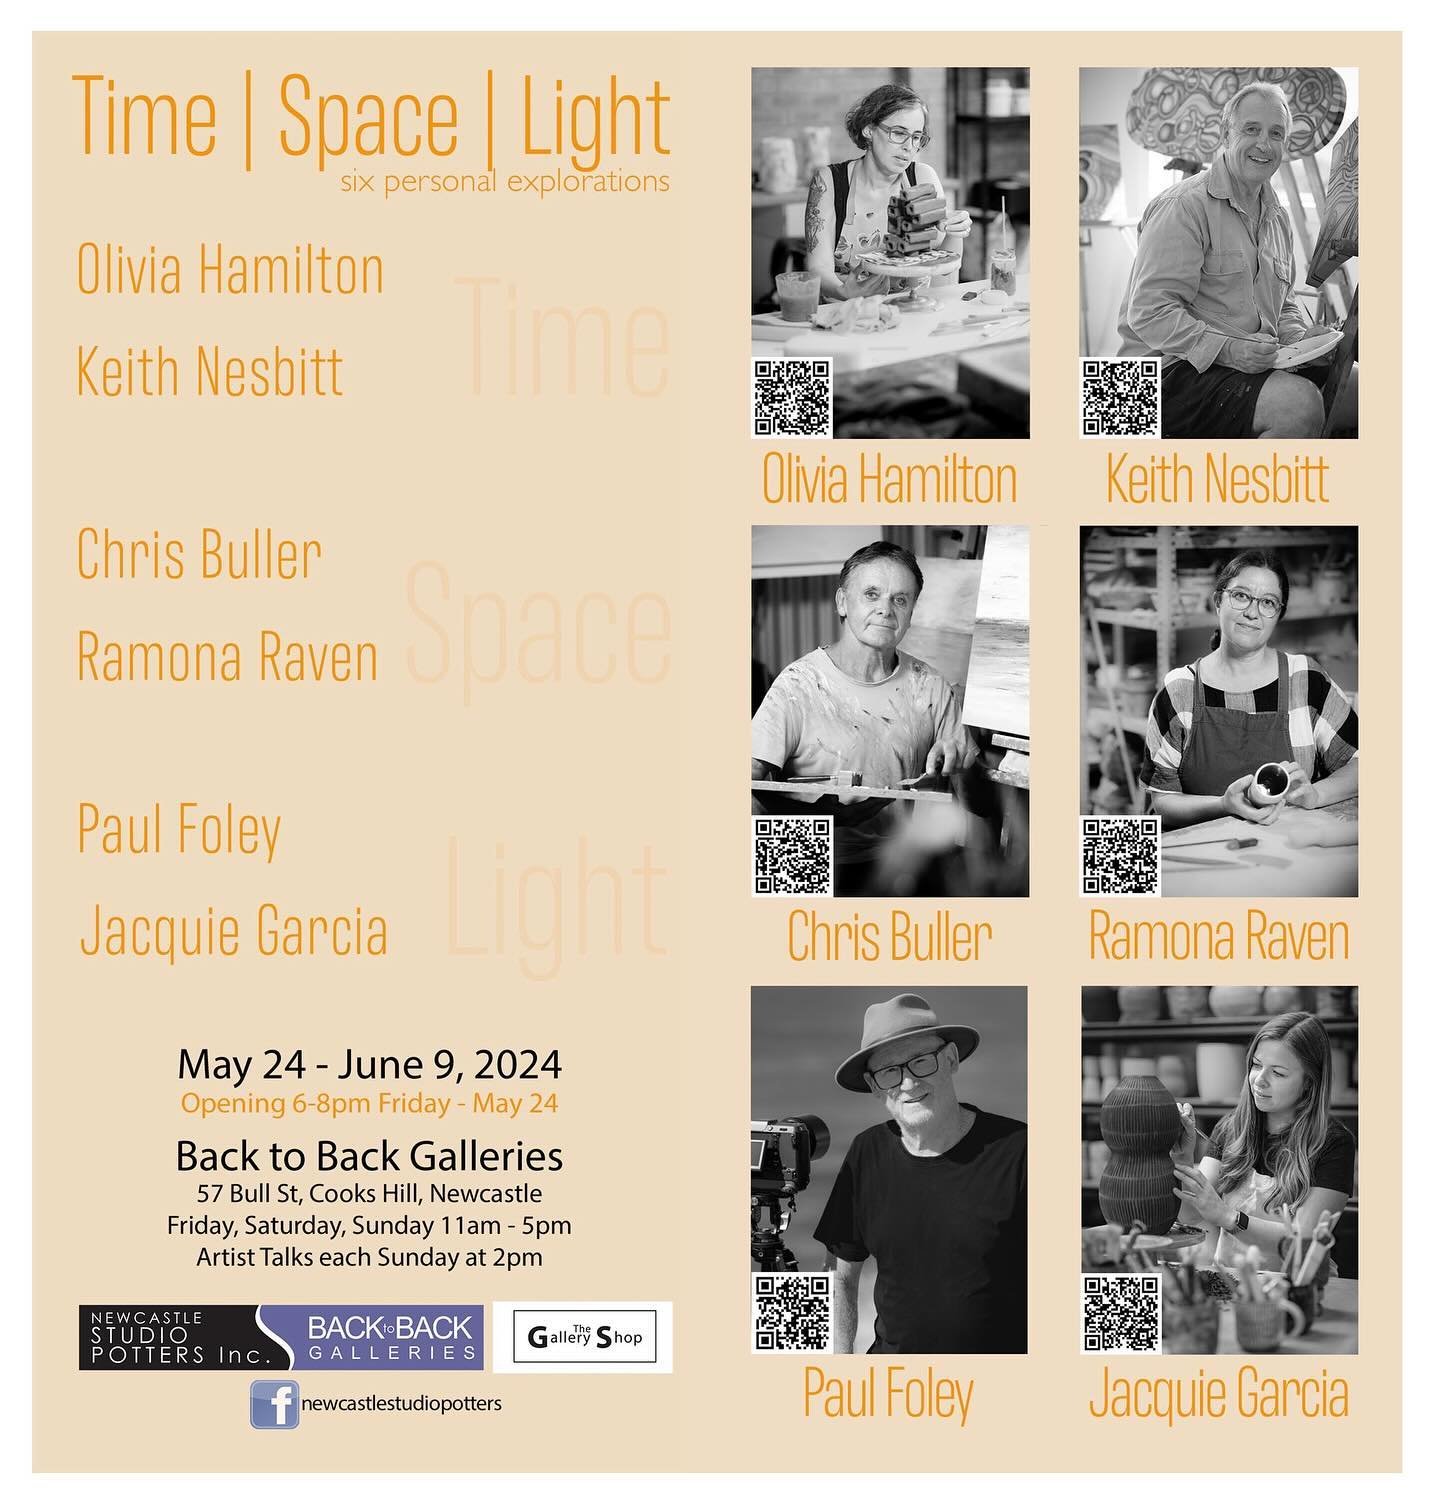 The Time Space Light Exhibition launches 🚀 on Friday night, May 24. 
Come join this unique collaboration of ceramics, painting and photography as six artists explore how time, space and light have shaped their creative lives. 
We&rsquo;re looking fo